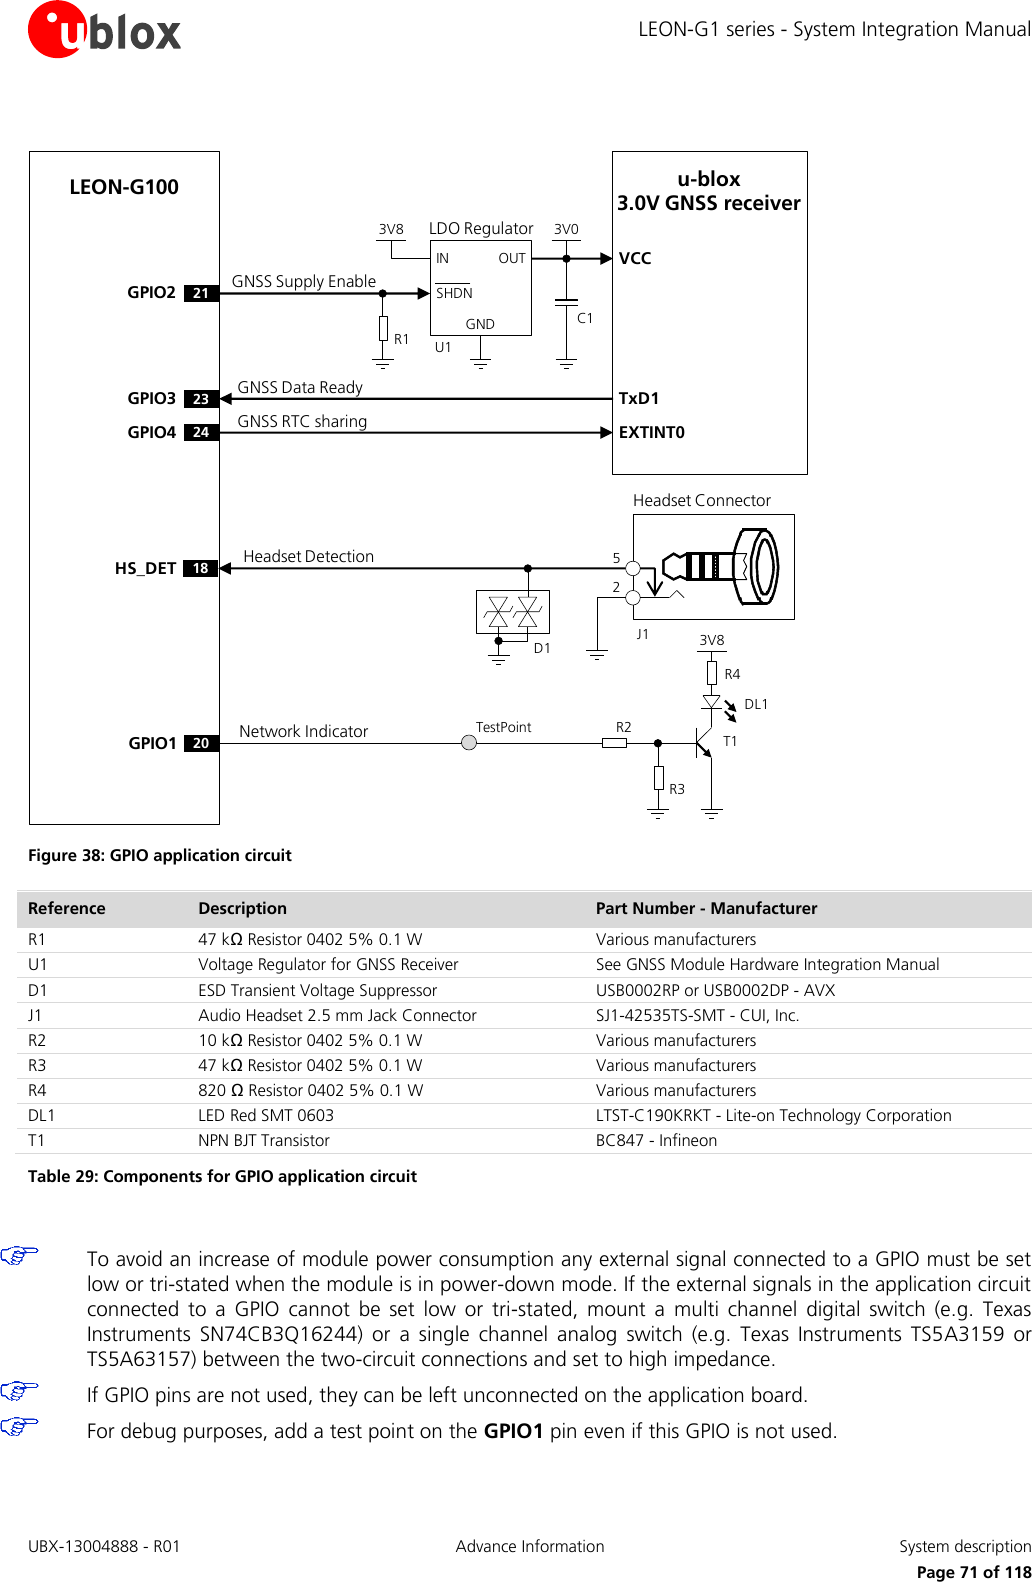 LEON-G1 series - System Integration Manual UBX-13004888 - R01  Advance Information  System description      Page 71 of 118  OUTINGNDLDO RegulatorSHDN3V8 3V0GPIO3GPIO4TxD1EXTINT02324R1VCCGPIO2 21LEON-G100 u-blox3.0V GNSS receiverU1C1R2R43V8Network IndicatorR3GNSS Supply EnableGNSS Data ReadyGNSS RTC sharingHeadset Detection20GPIO1DL1T1D1TestPointHeadset ConnectorJ12518HS_DET Figure 38: GPIO application circuit Reference Description Part Number - Manufacturer R1 47 kΩ Resistor 0402 5% 0.1 W Various manufacturers U1 Voltage Regulator for GNSS Receiver See GNSS Module Hardware Integration Manual D1 ESD Transient Voltage Suppressor USB0002RP or USB0002DP - AVX J1 Audio Headset 2.5 mm Jack Connector SJ1-42535TS-SMT - CUI, Inc. R2 10 kΩ Resistor 0402 5% 0.1 W Various manufacturers R3 47 kΩ Resistor 0402 5% 0.1 W Various manufacturers R4 820 Ω Resistor 0402 5% 0.1 W Various manufacturers DL1 LED Red SMT 0603 LTST-C190KRKT - Lite-on Technology Corporation T1 NPN BJT Transistor  BC847 - Infineon Table 29: Components for GPIO application circuit   To avoid an increase of module power consumption any external signal connected to a GPIO must be set low or tri-stated when the module is in power-down mode. If the external signals in the application circuit connected  to  a  GPIO  cannot  be  set  low  or  tri-stated,  mount  a  multi  channel  digital  switch  (e.g.  Texas Instruments  SN74CB3Q16244)  or  a  single  channel  analog  switch  (e.g.  Texas  Instruments  TS5A3159  or TS5A63157) between the two-circuit connections and set to high impedance.  If GPIO pins are not used, they can be left unconnected on the application board.  For debug purposes, add a test point on the GPIO1 pin even if this GPIO is not used.  